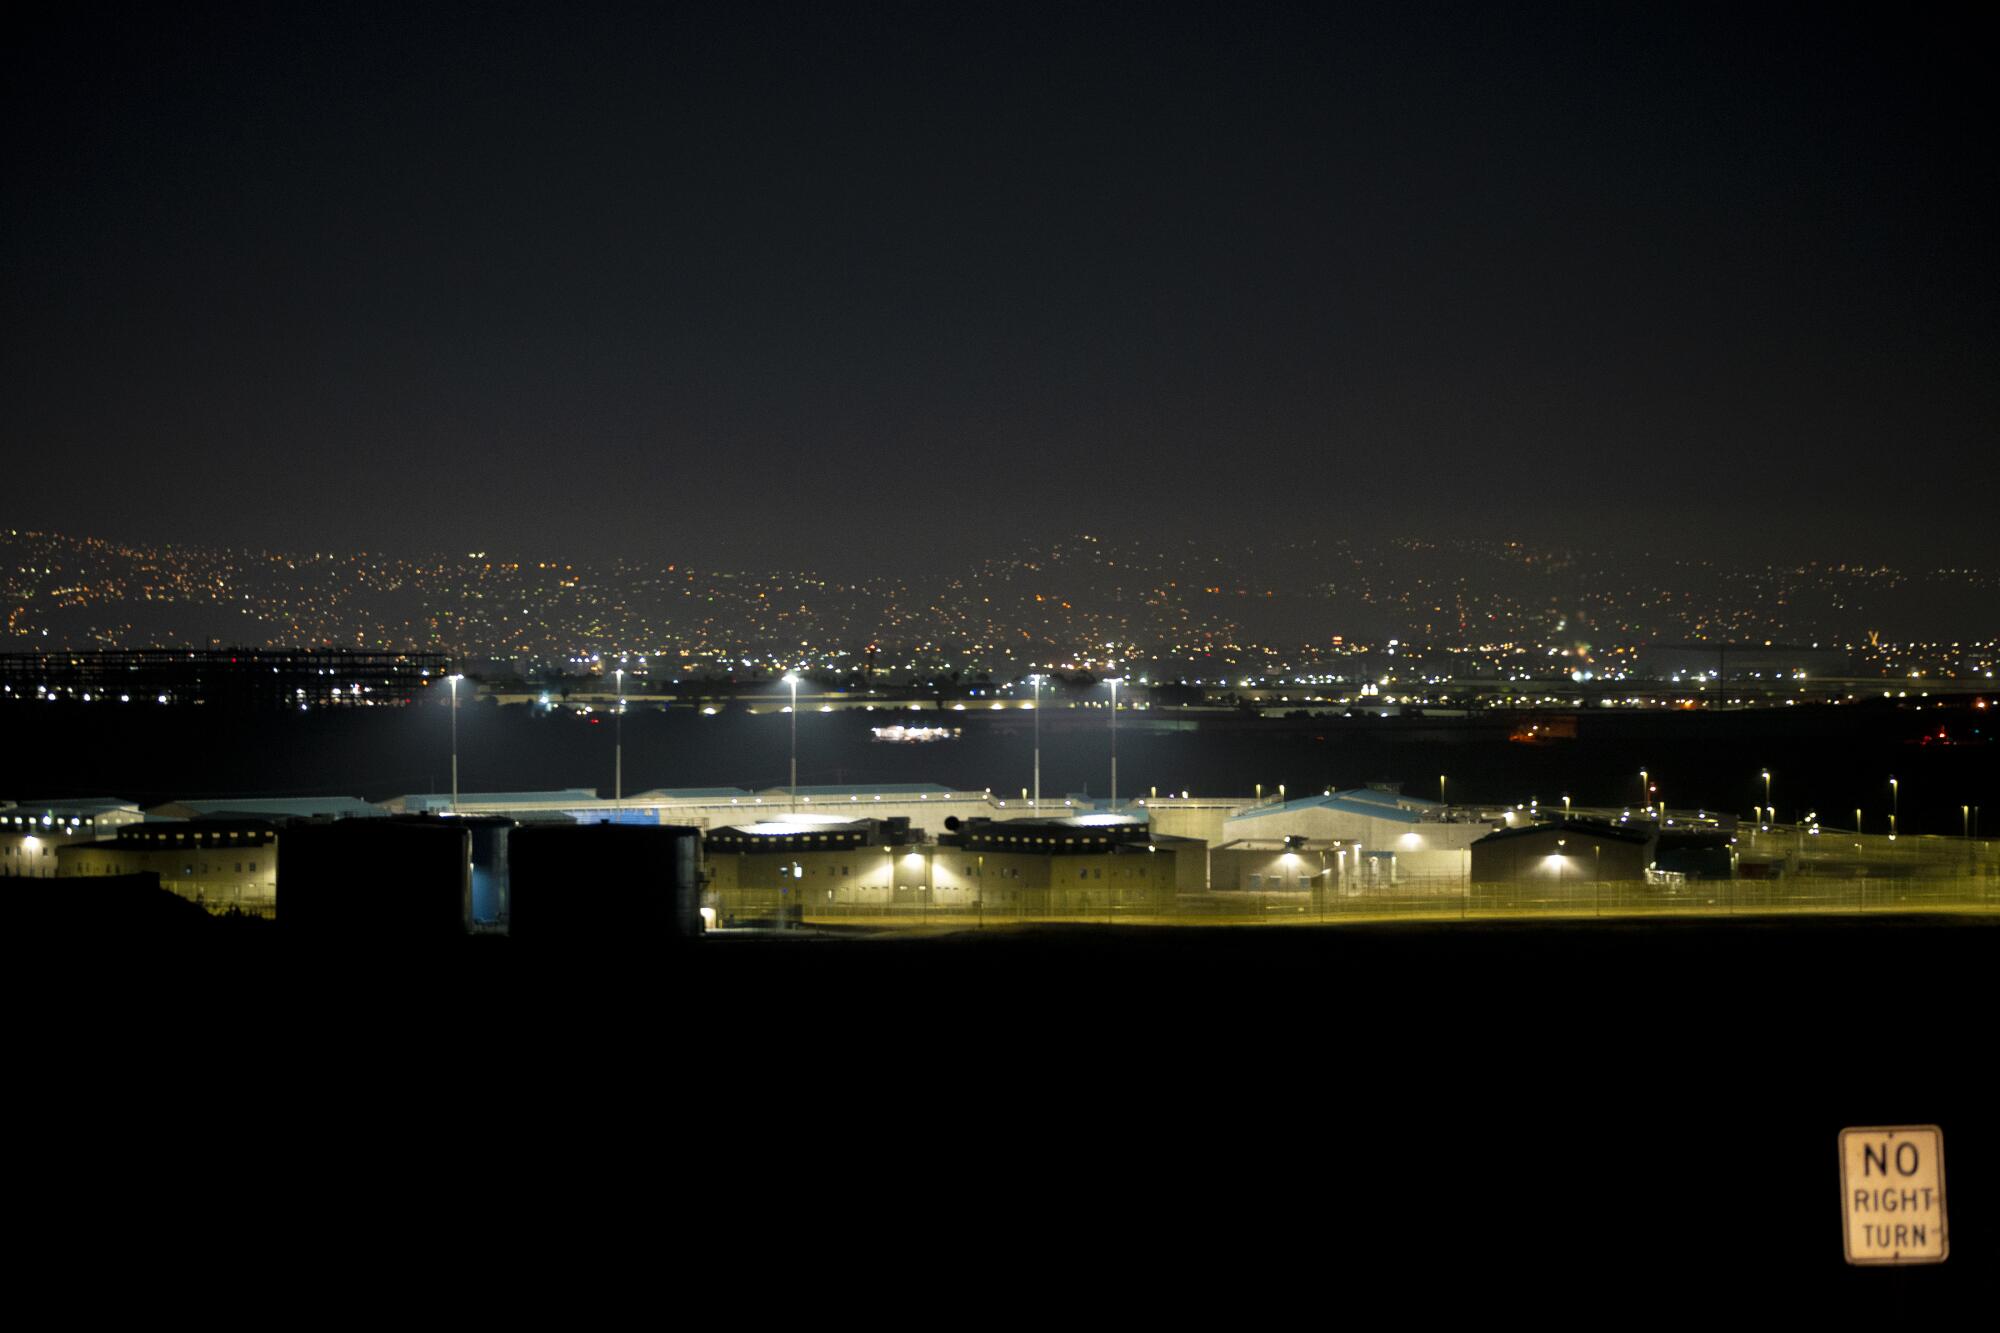 Otay Mesa Detention Center at night with the lights of Tijuana visible in the distance behind the building